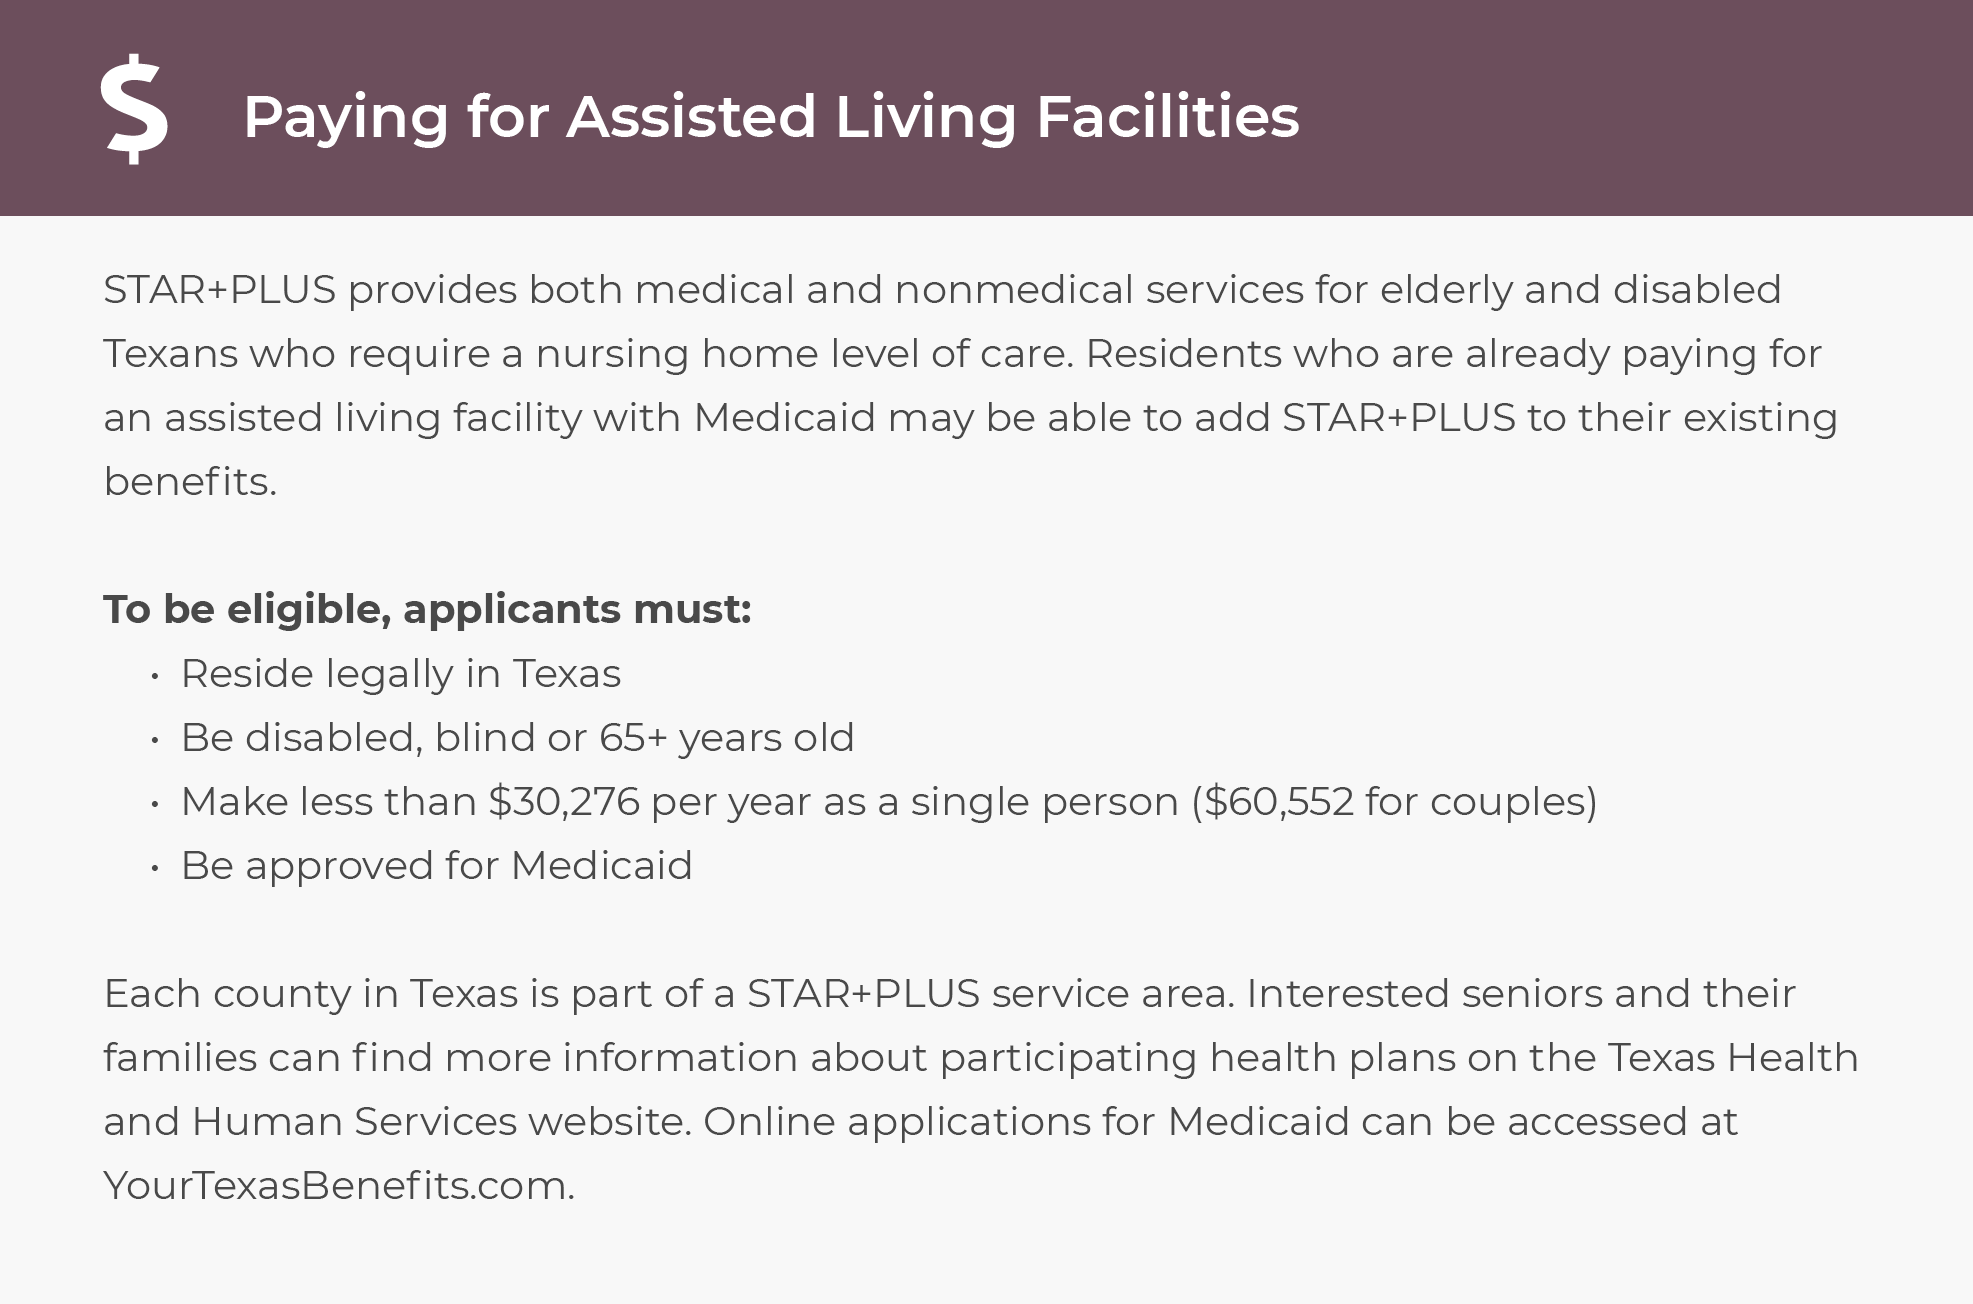 Paying for assisted living facilities in Texas